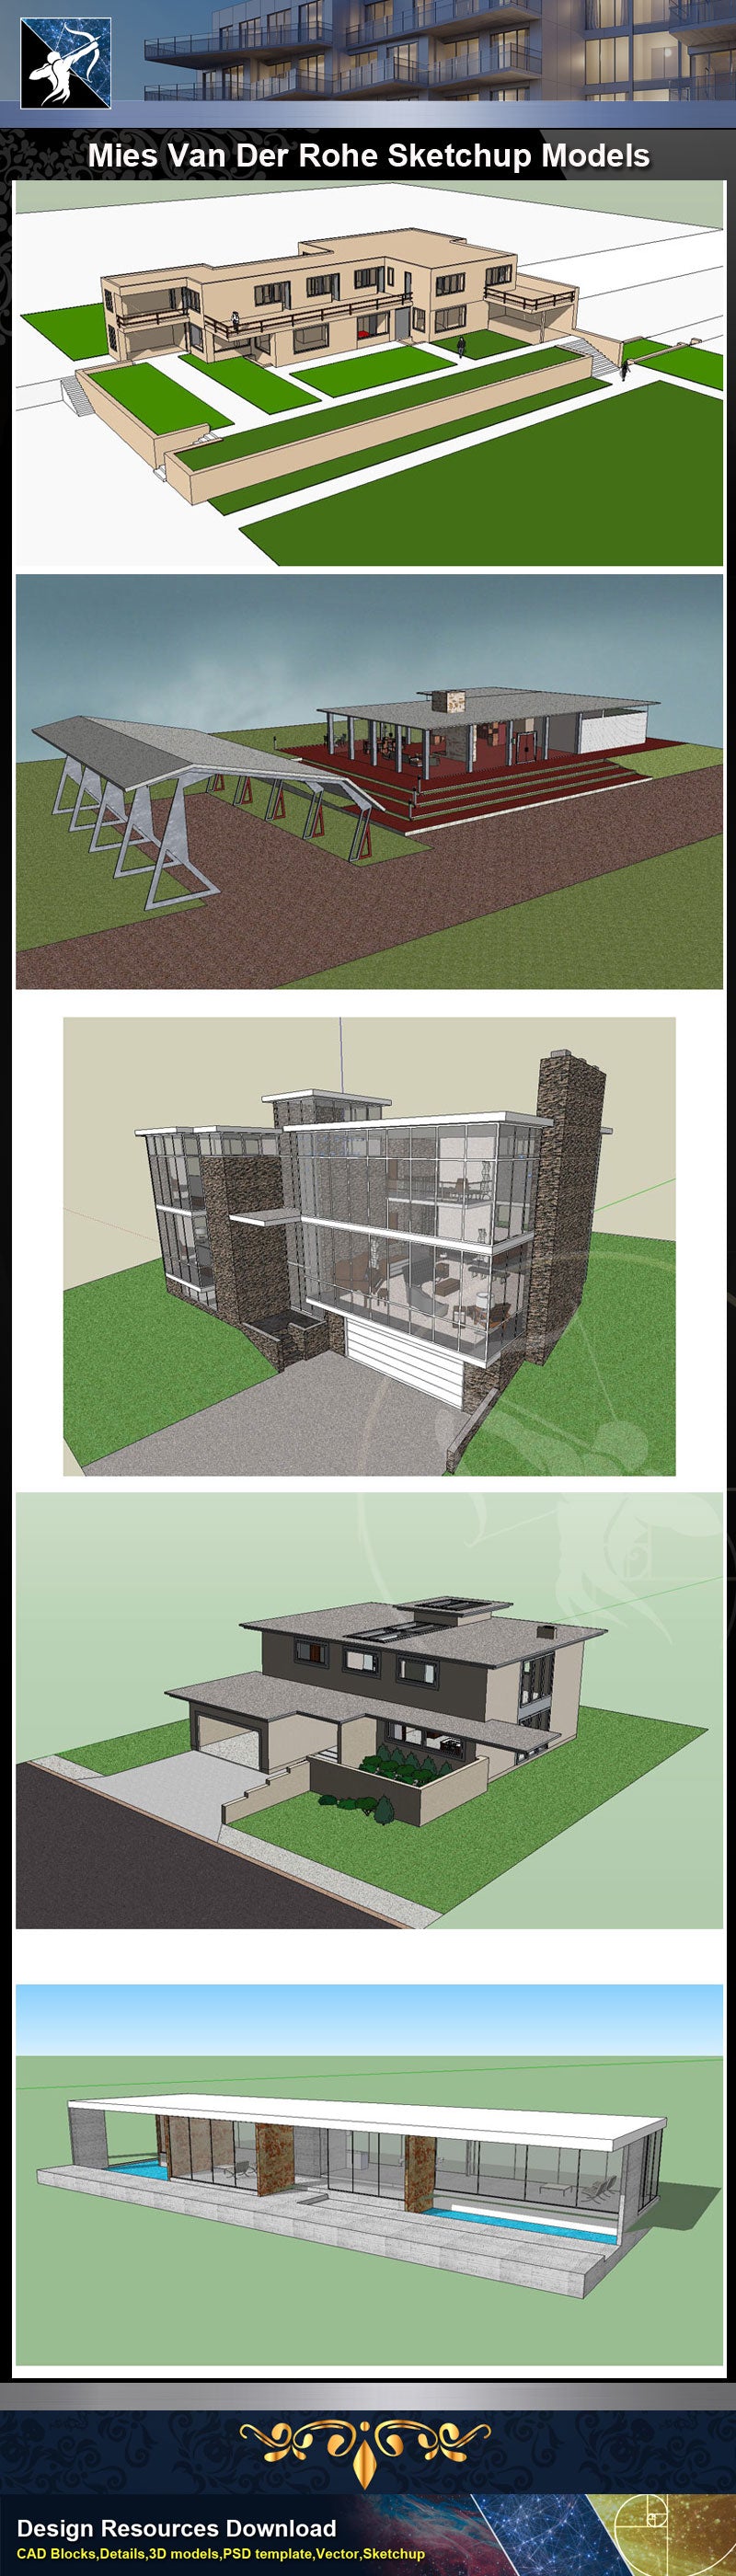 ★Famous Architecture -17 Kinds of Mies Van Der Rohe Sketchup 3D Models